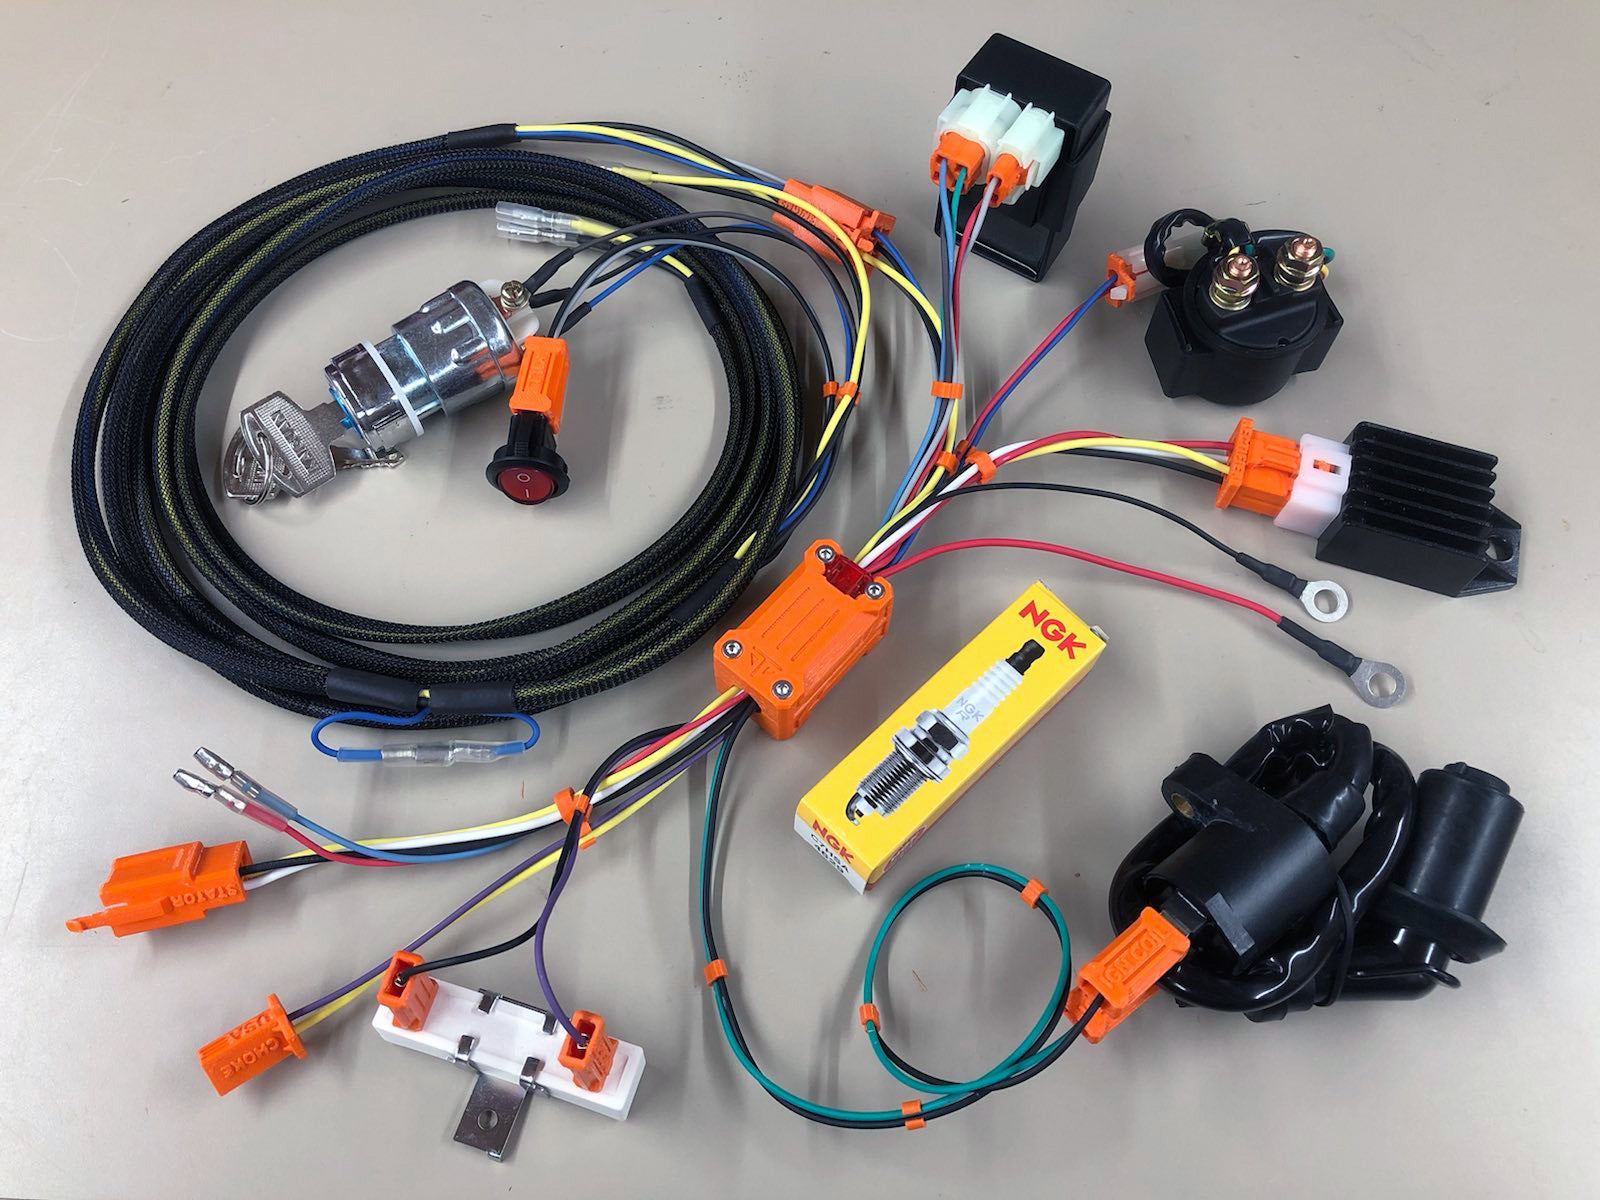 Over Under Start/Kill Switch - rewired to plug into your late model KTM